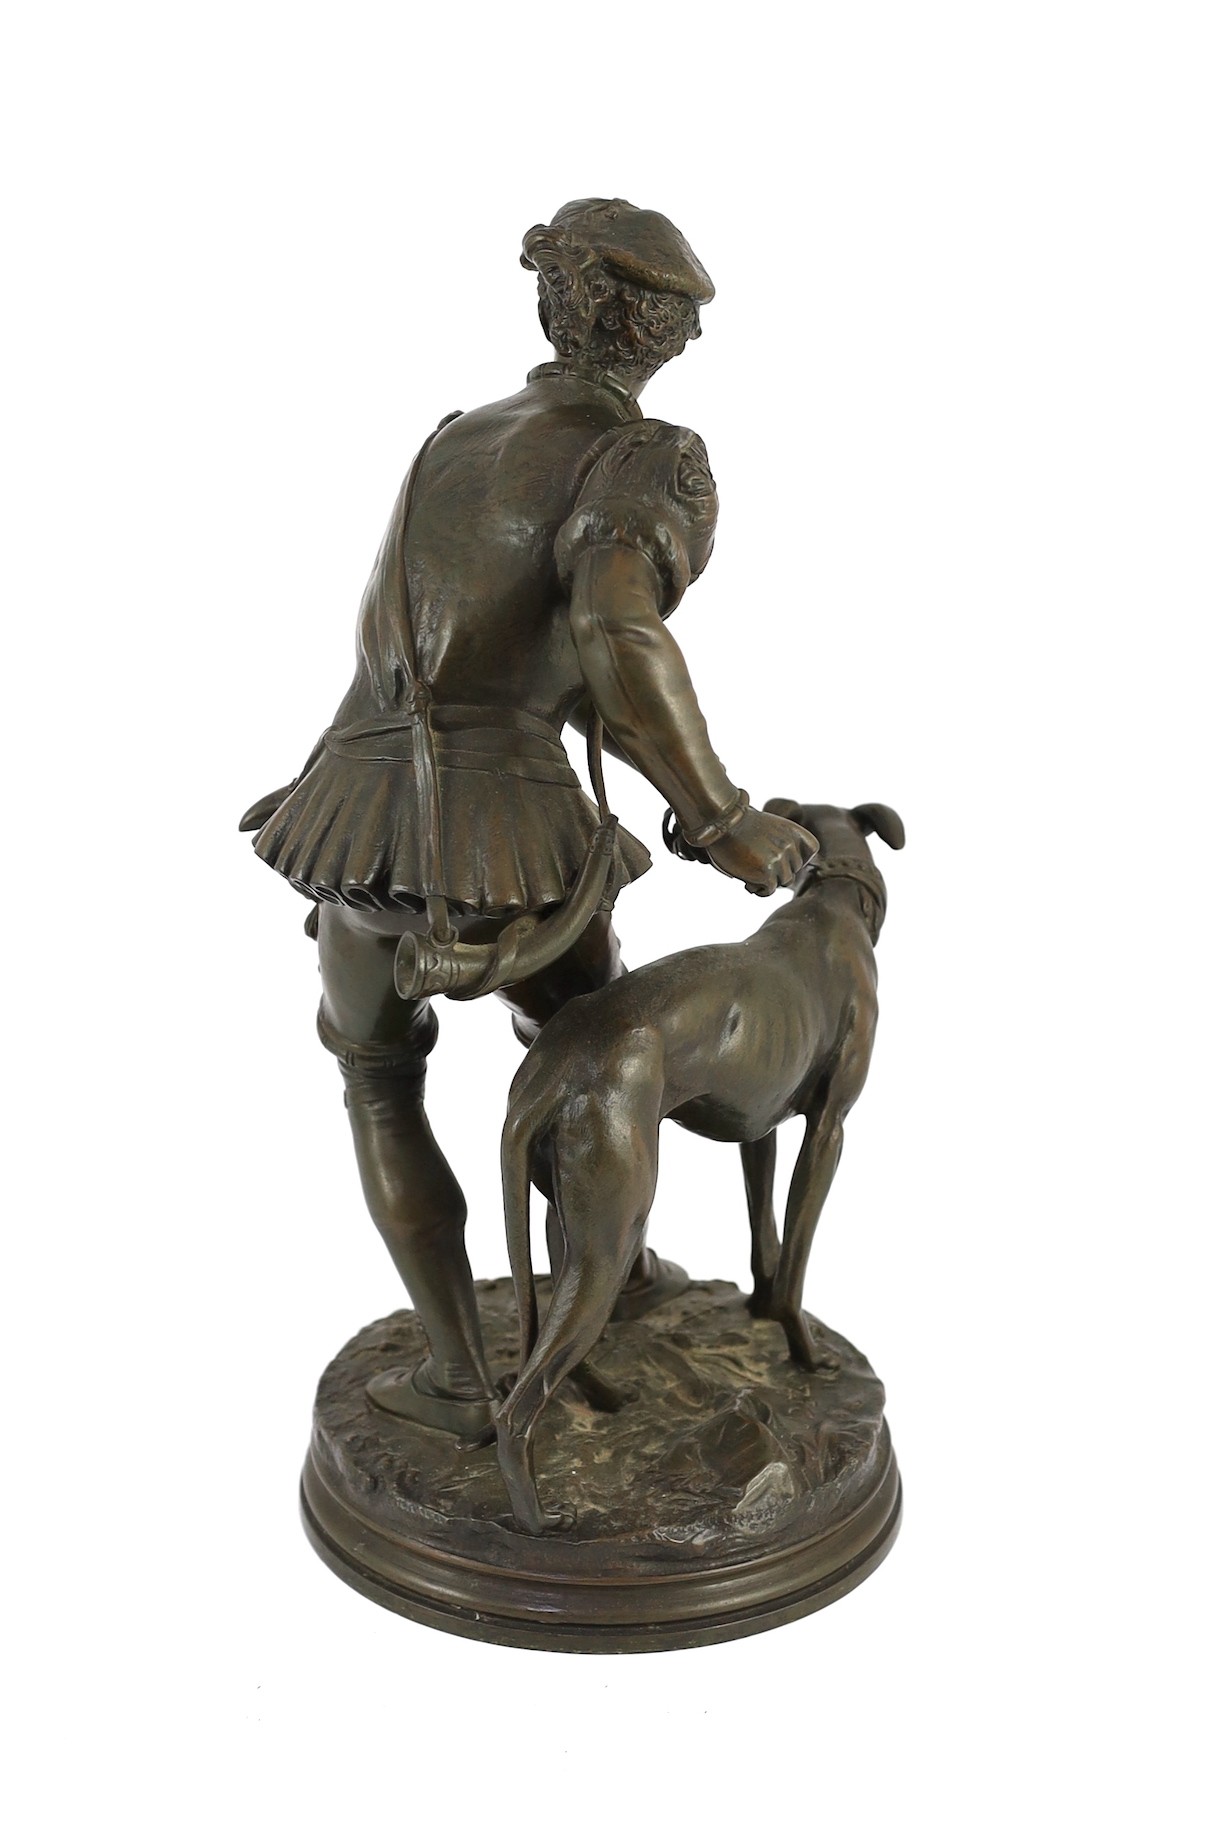 Adrien Etienne Gaudez (French, 1845-1902). A bronze group of a huntsman and hound, height 39cm